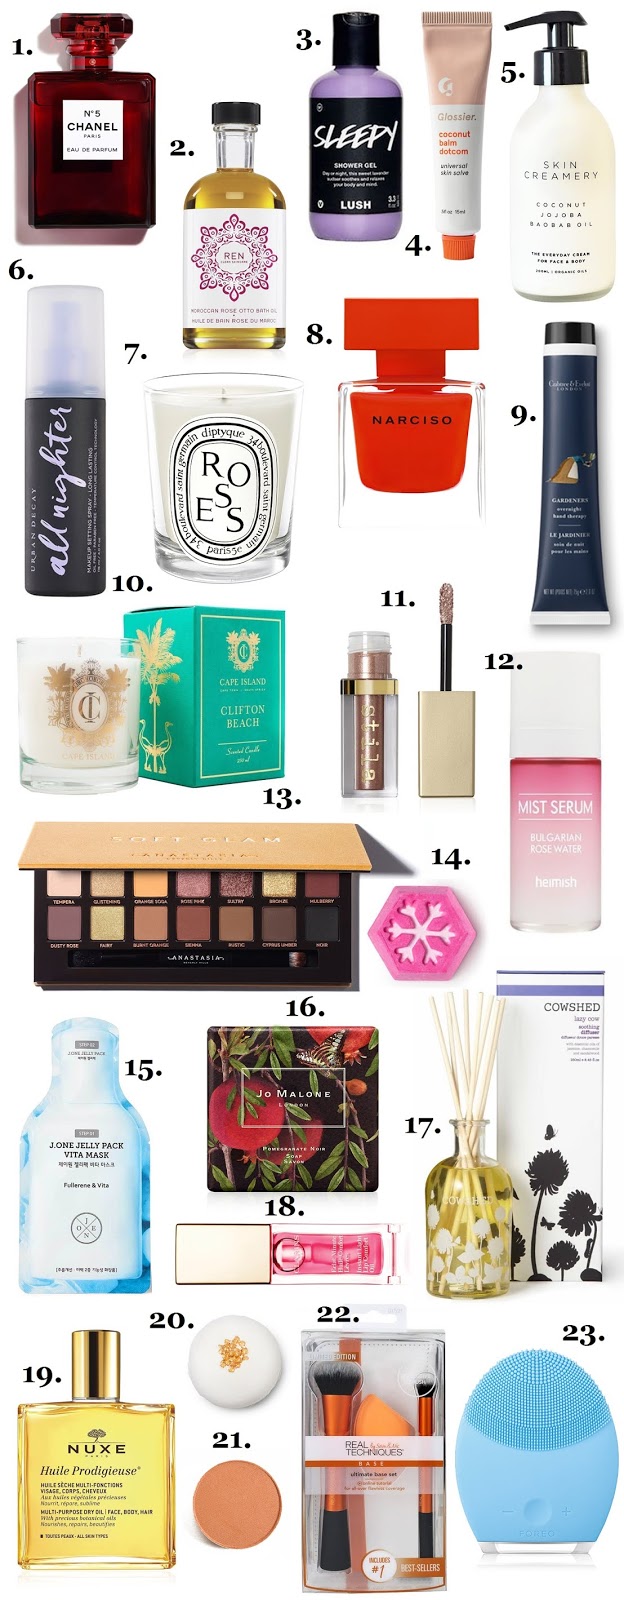 BEAUTY CHRISTMAS GIFT GUIDE - Kiss Blush & Tell - Skincare and